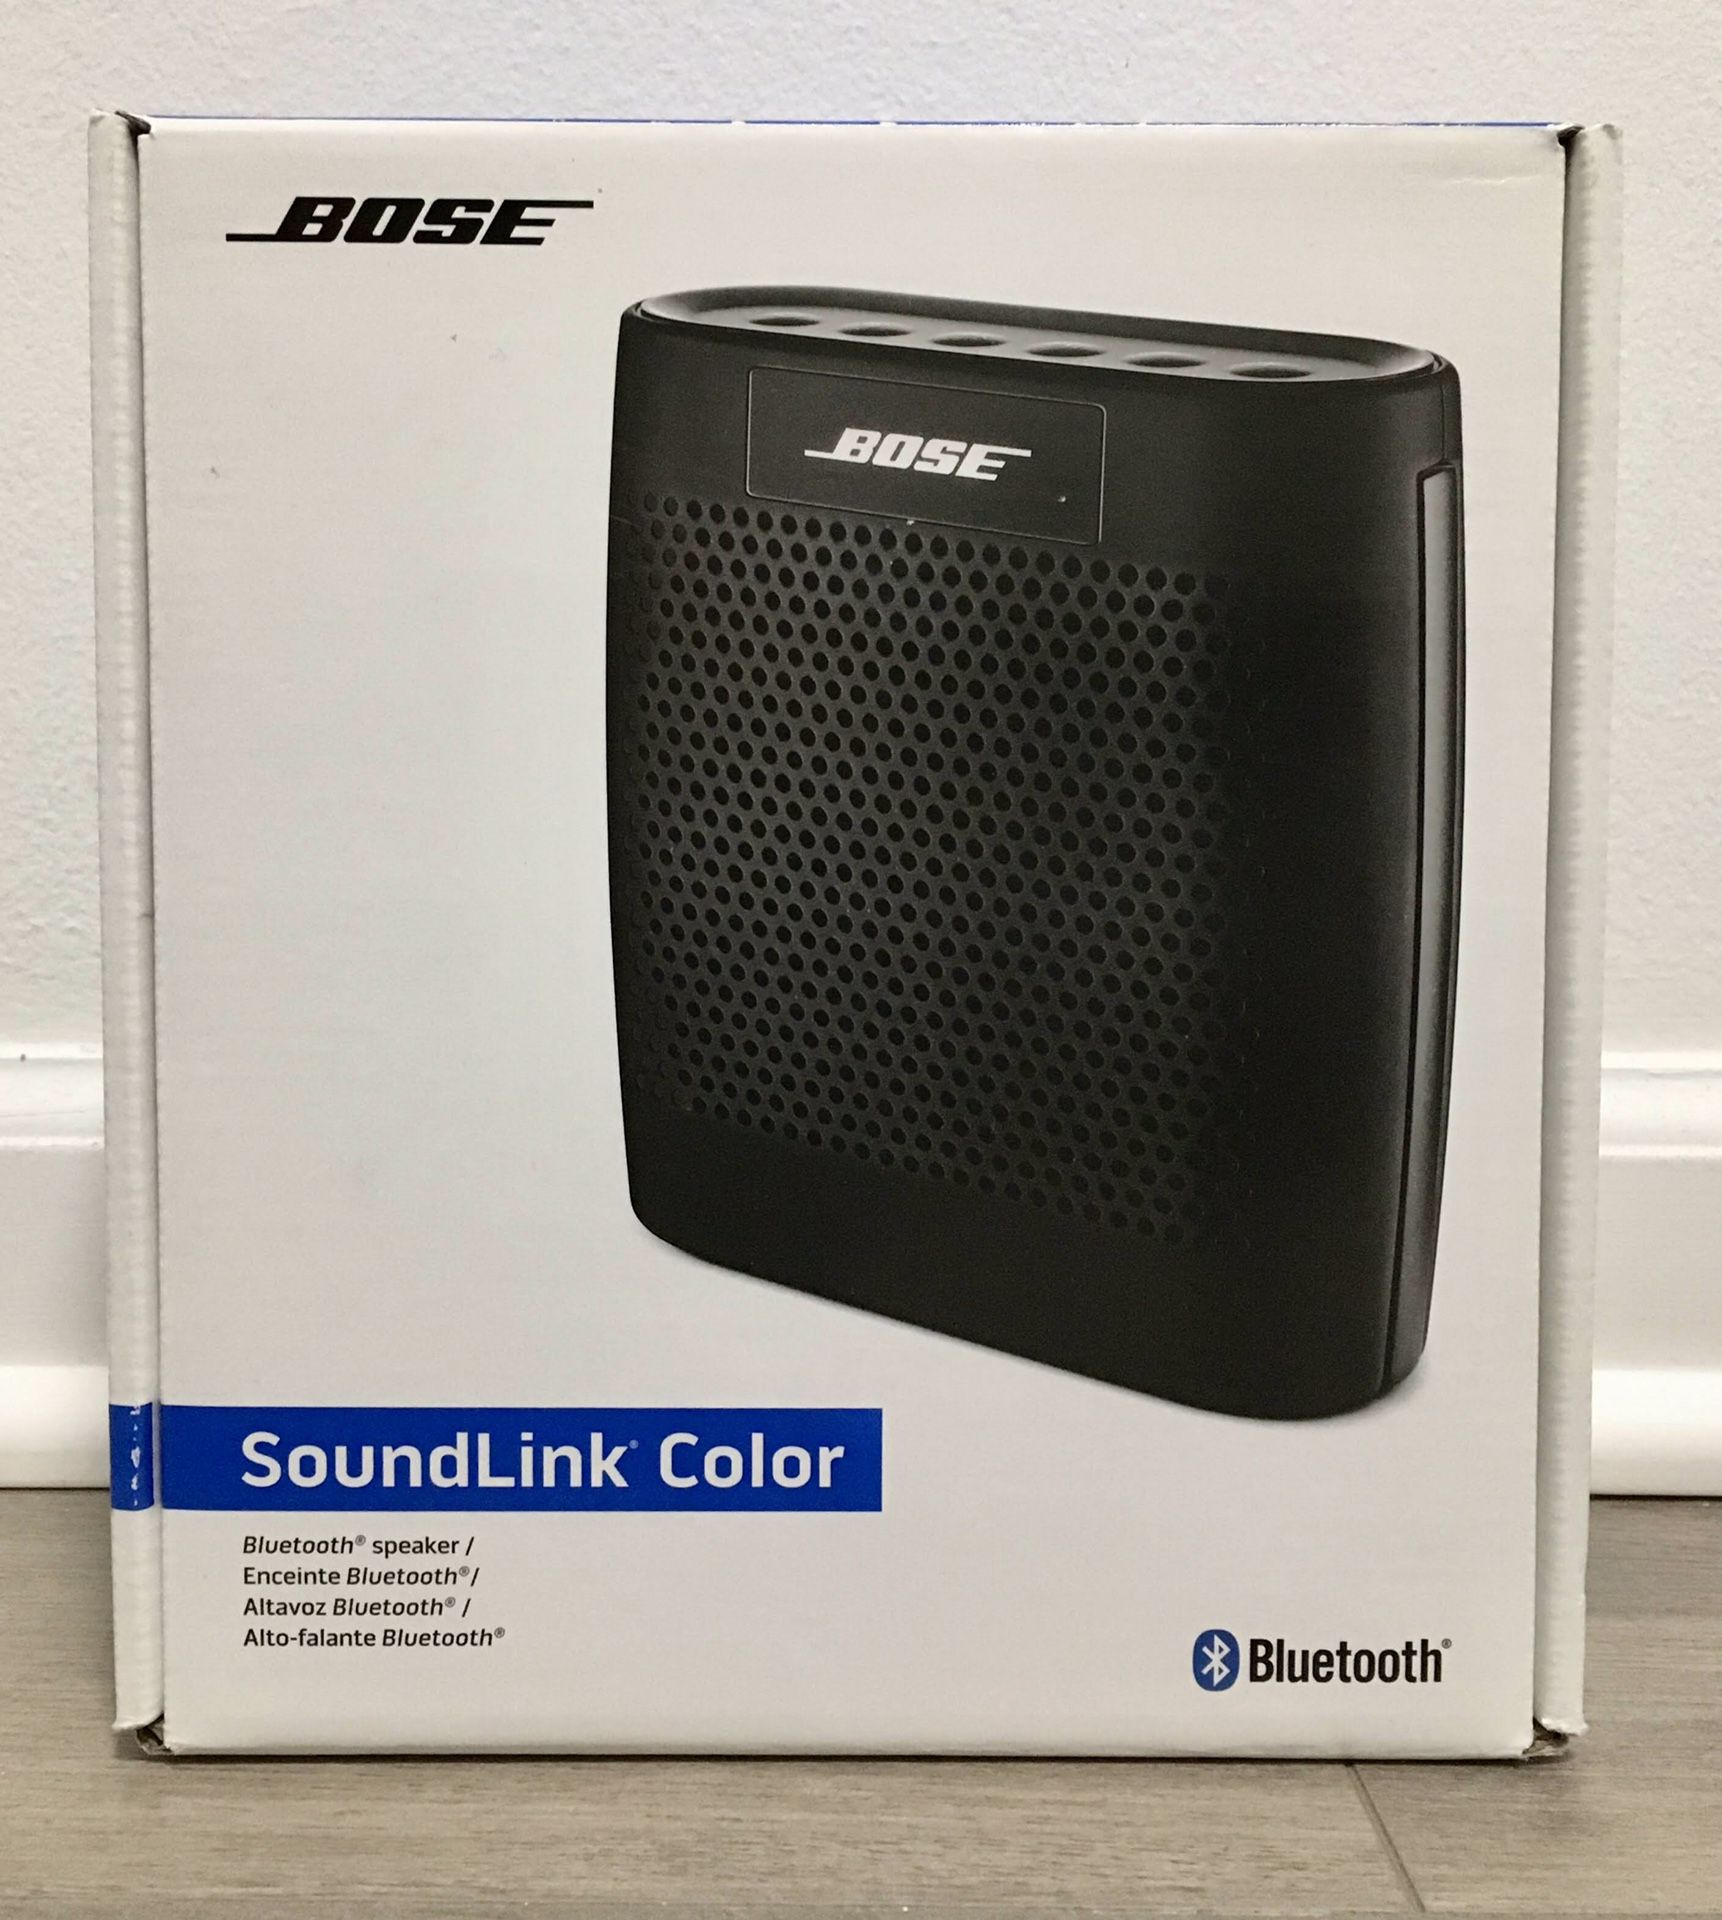 100% New never open it Bose SoundLink Color Bluetooth Speaker Shipping Available